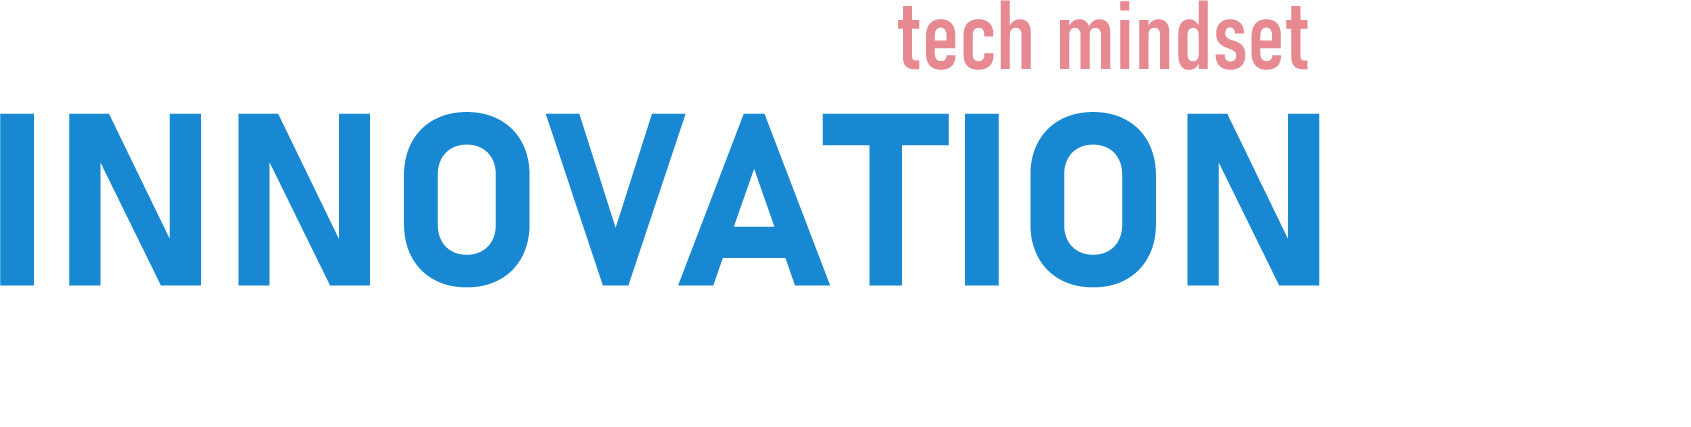 Meet the faces of the new tech mindset. Innovation starts with us.